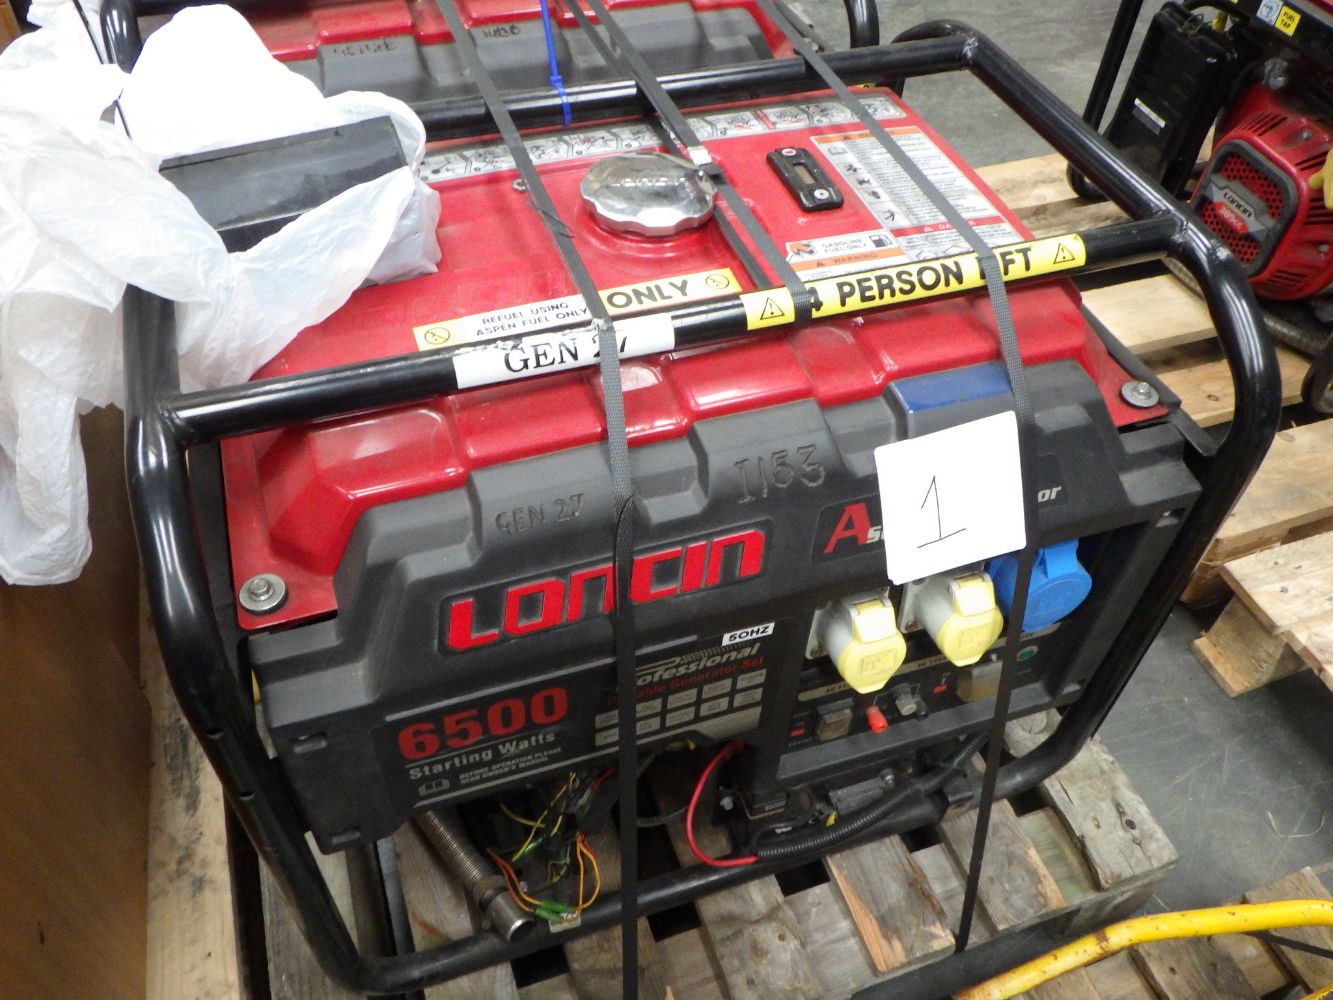 Timed auction of grounds care equipment, small plant, spare parts and other sundry items.